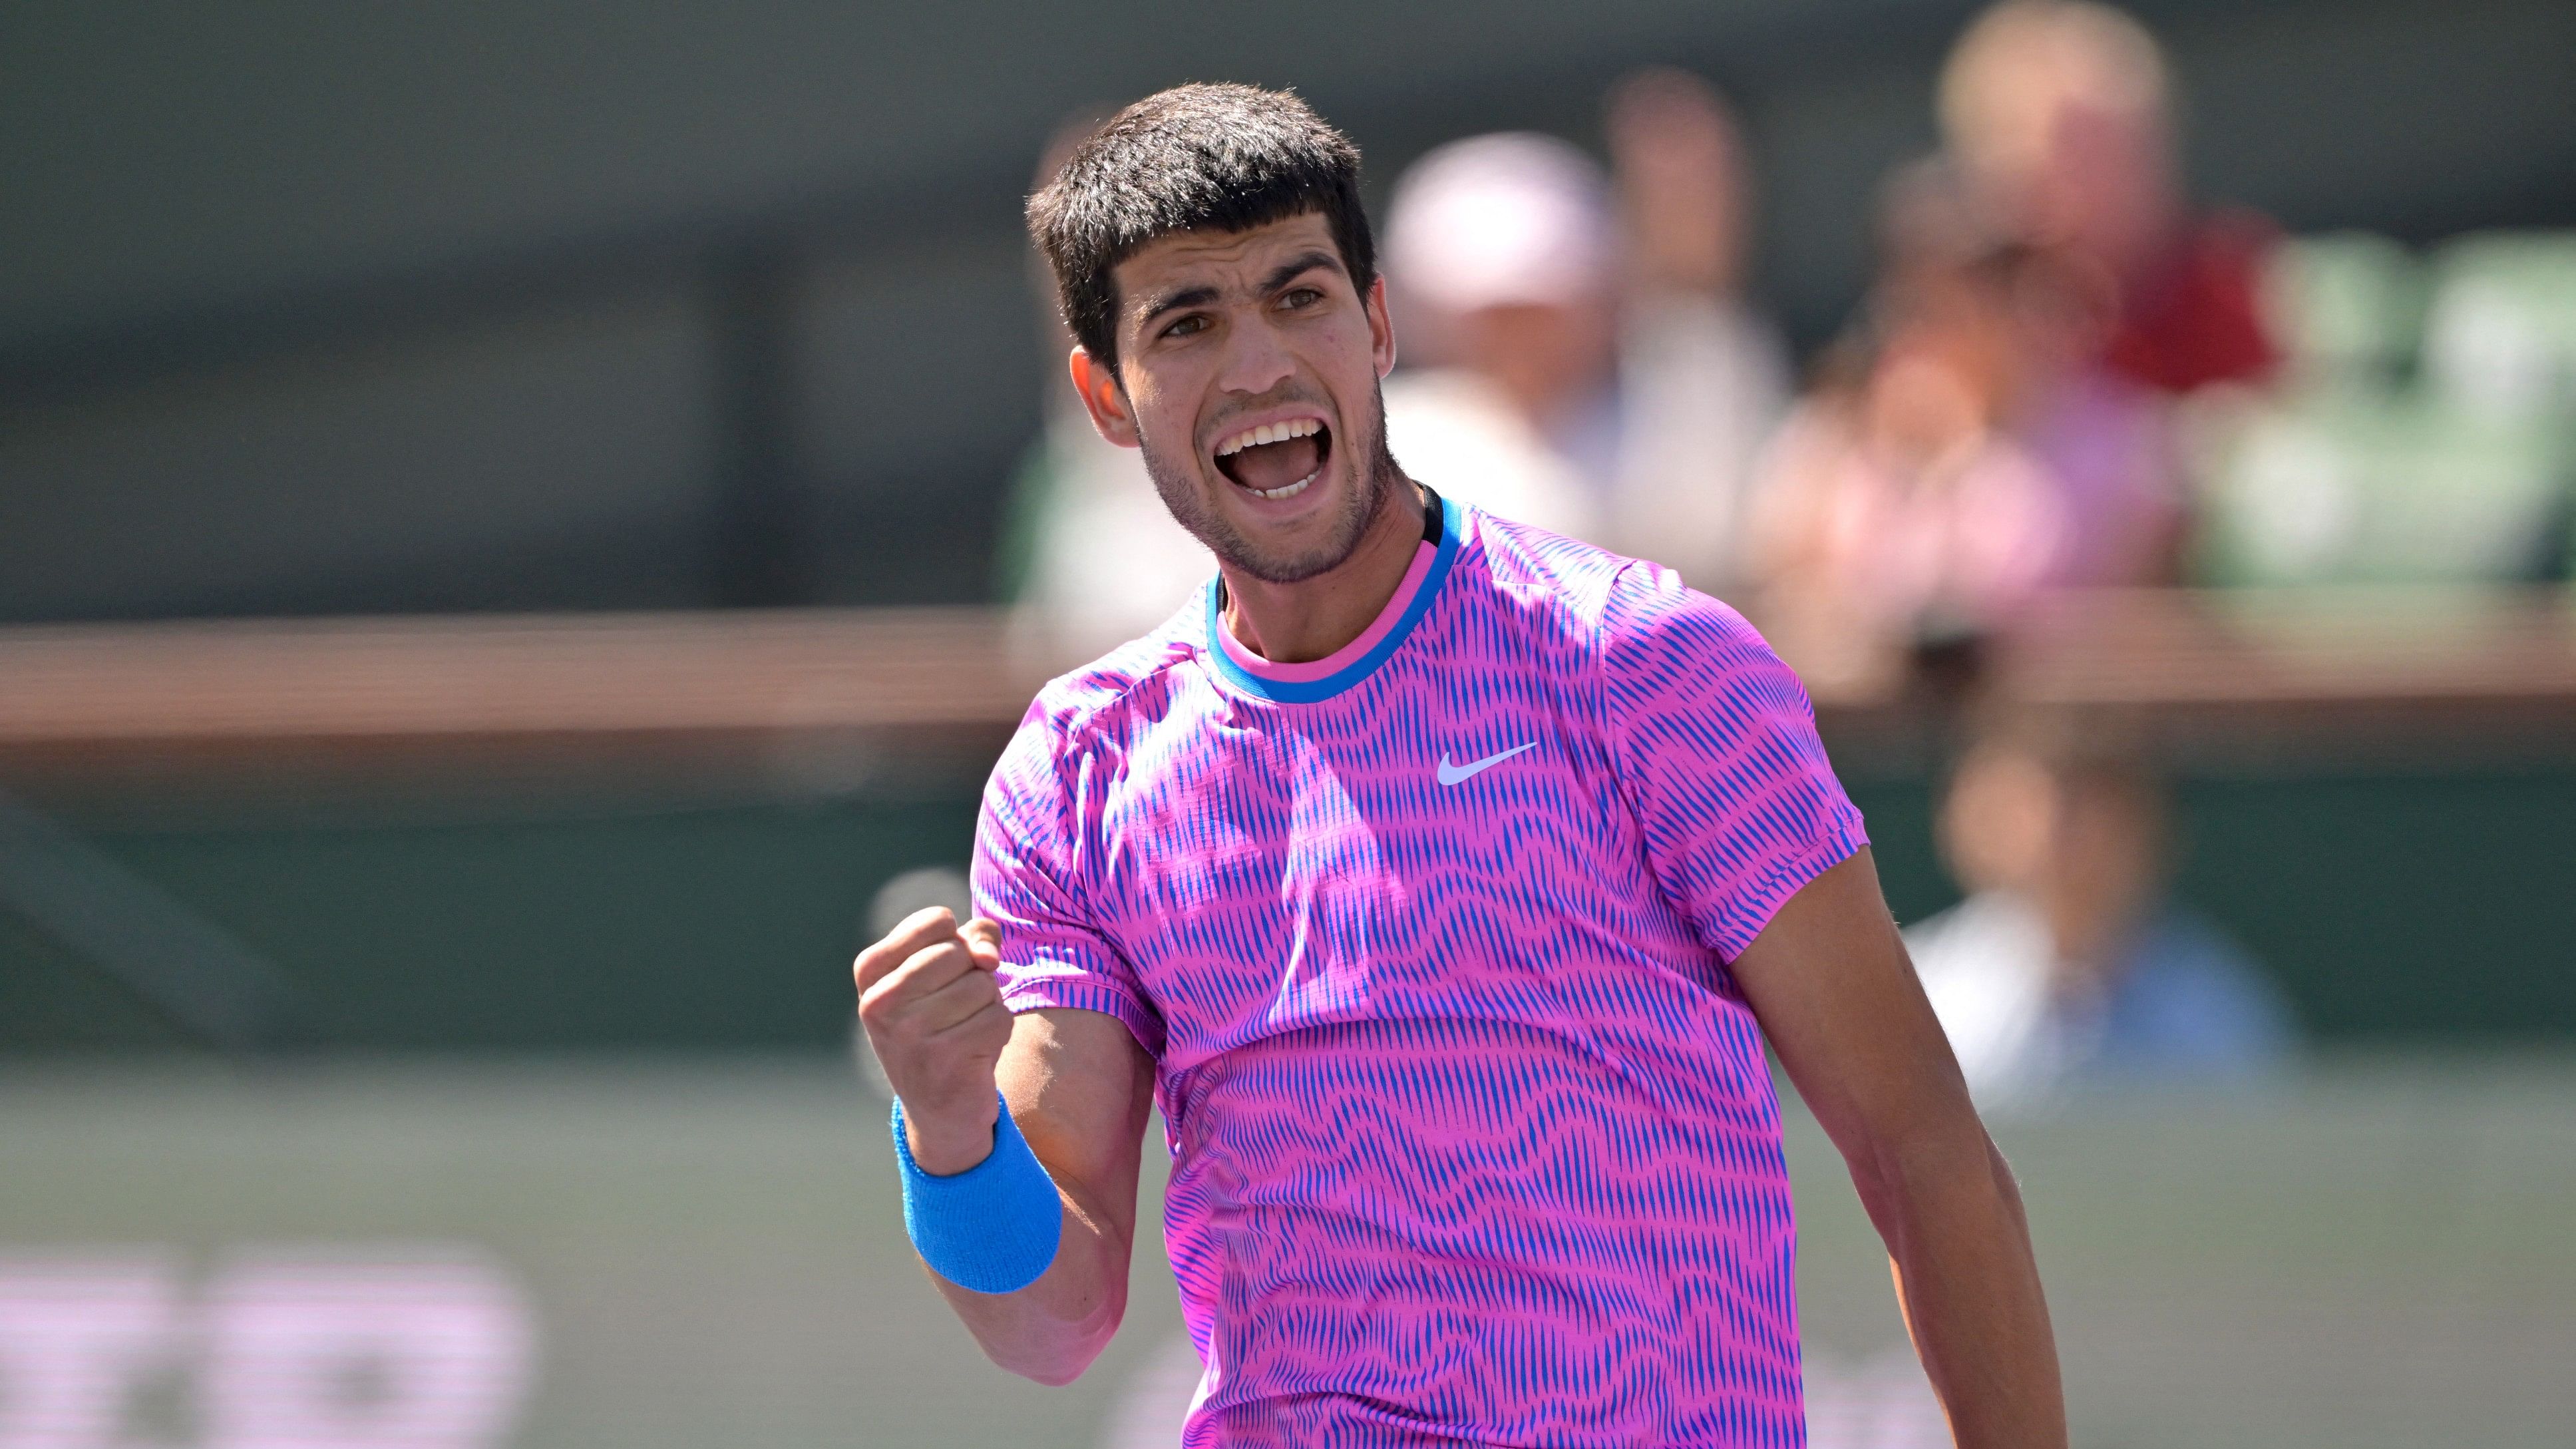 <div class="paragraphs"><p>Carlos Alcaraz (ESP) reacts after winning a point in his fourth round match defeating Fabian Marozsan (HUN) in the BNP Paribas Open at the Indian Wells Tennis Garden. </p></div>